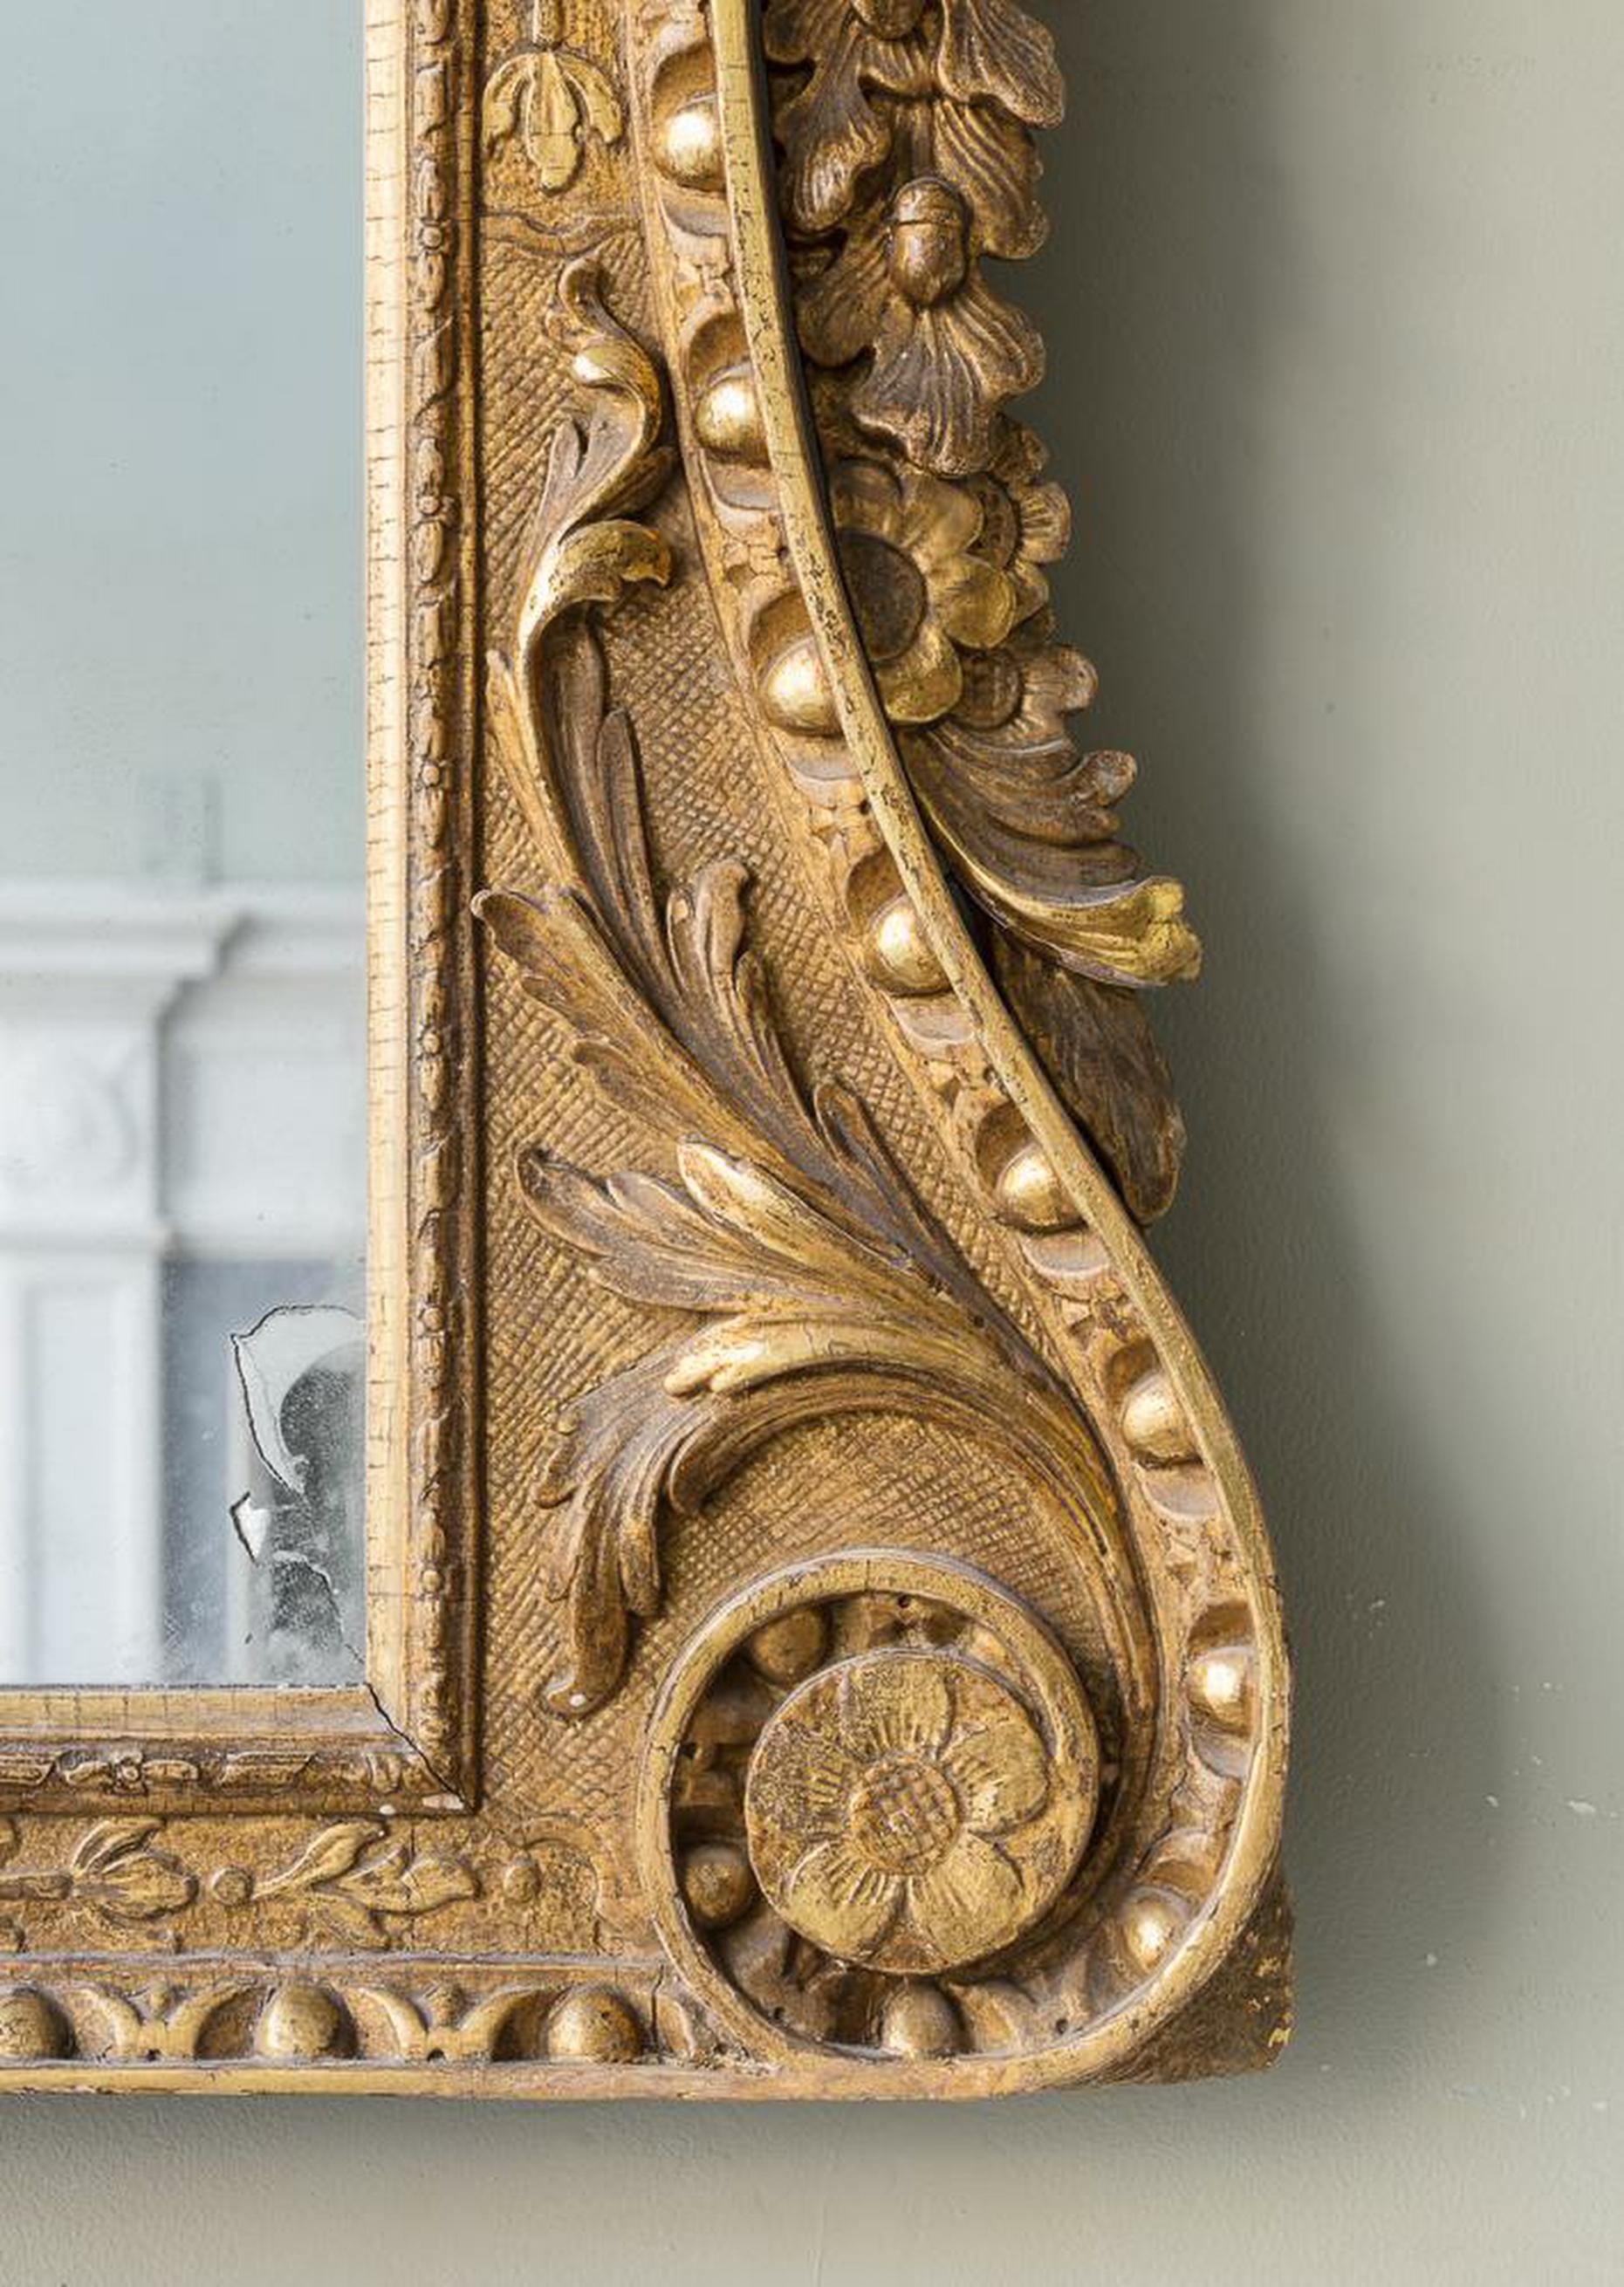 Giltwood overmantle mirror
A mid 18th century carved giltwood overmantle mirror, with swan neck broken pediment centred by a scrolling foliate cartouche, above shell and acanthus decorated frieze, with overall egg and dart carved reentrant frame,